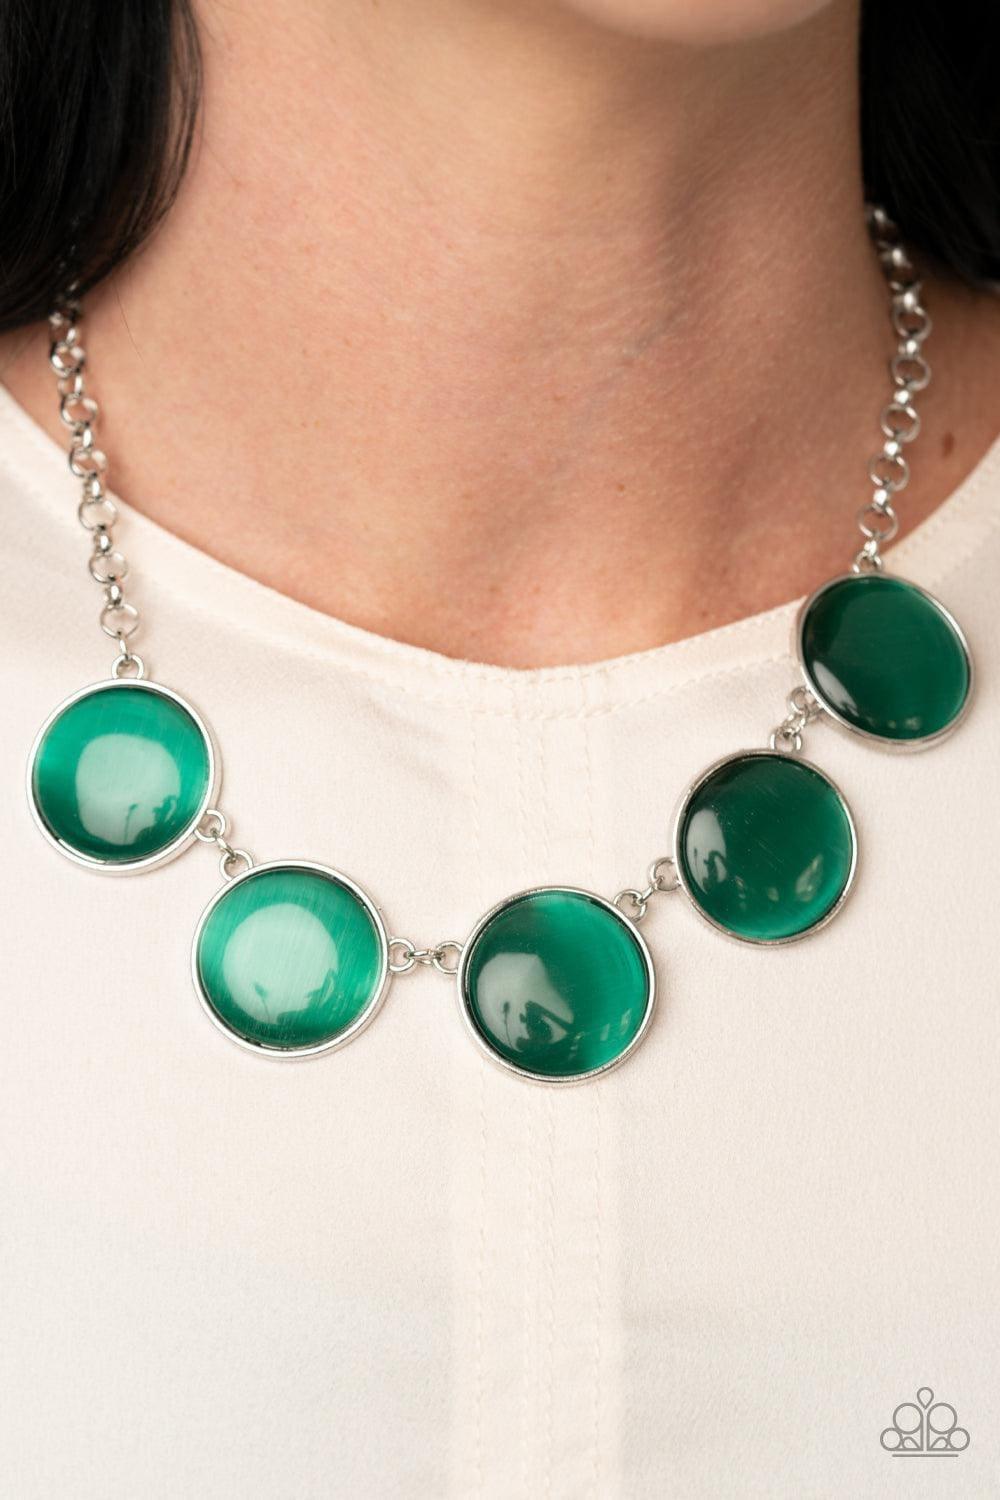 Paparazzi Accessories - Ethereal Escape - Green Necklace - Bling by JessieK